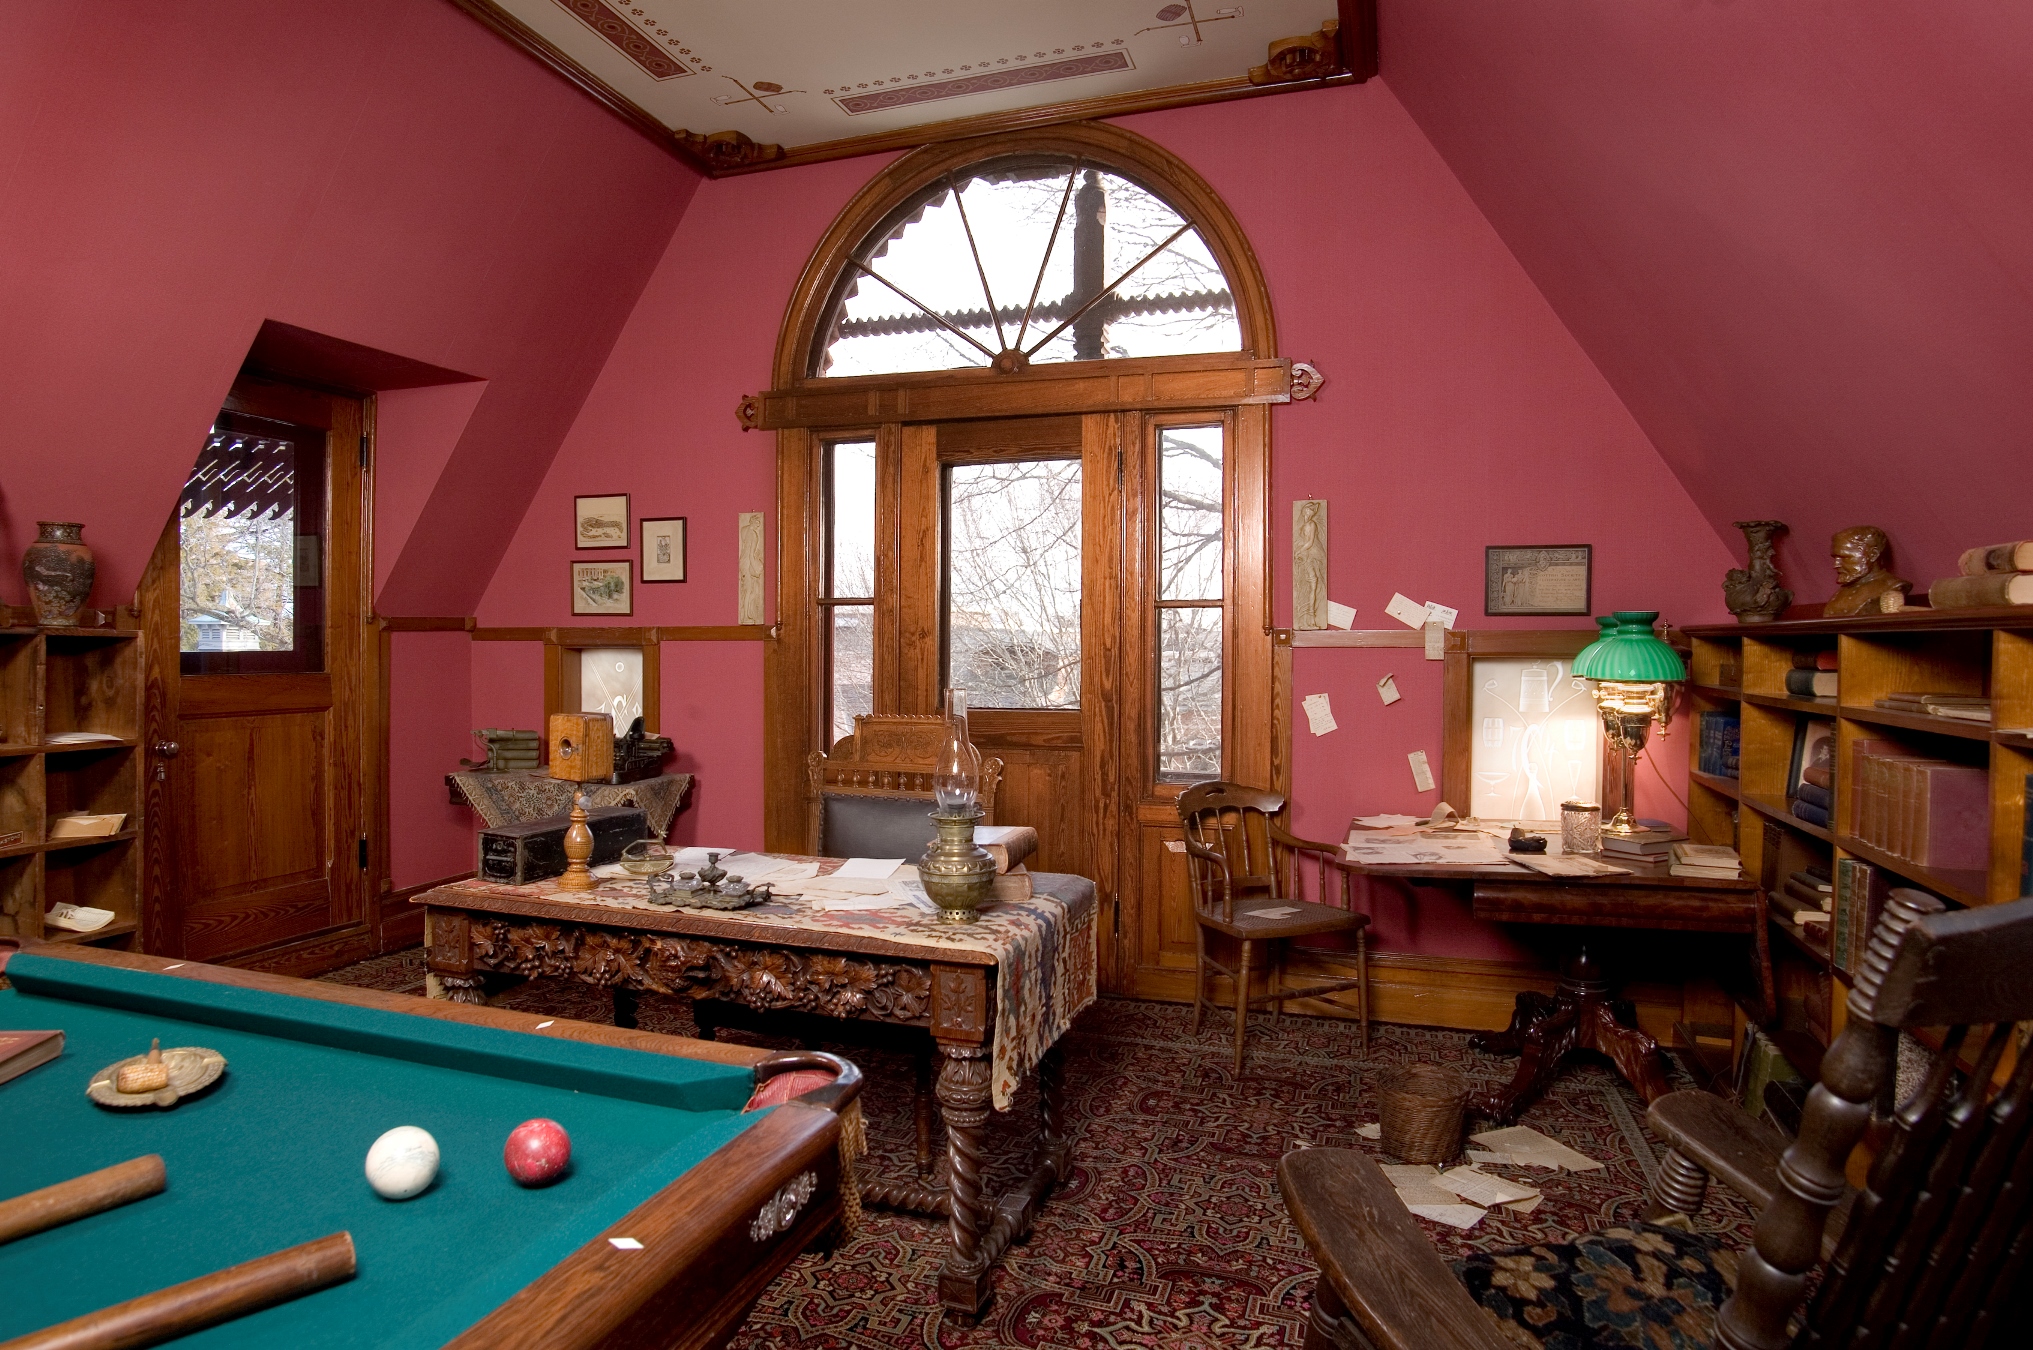 Playing pool in Mark Twain's home